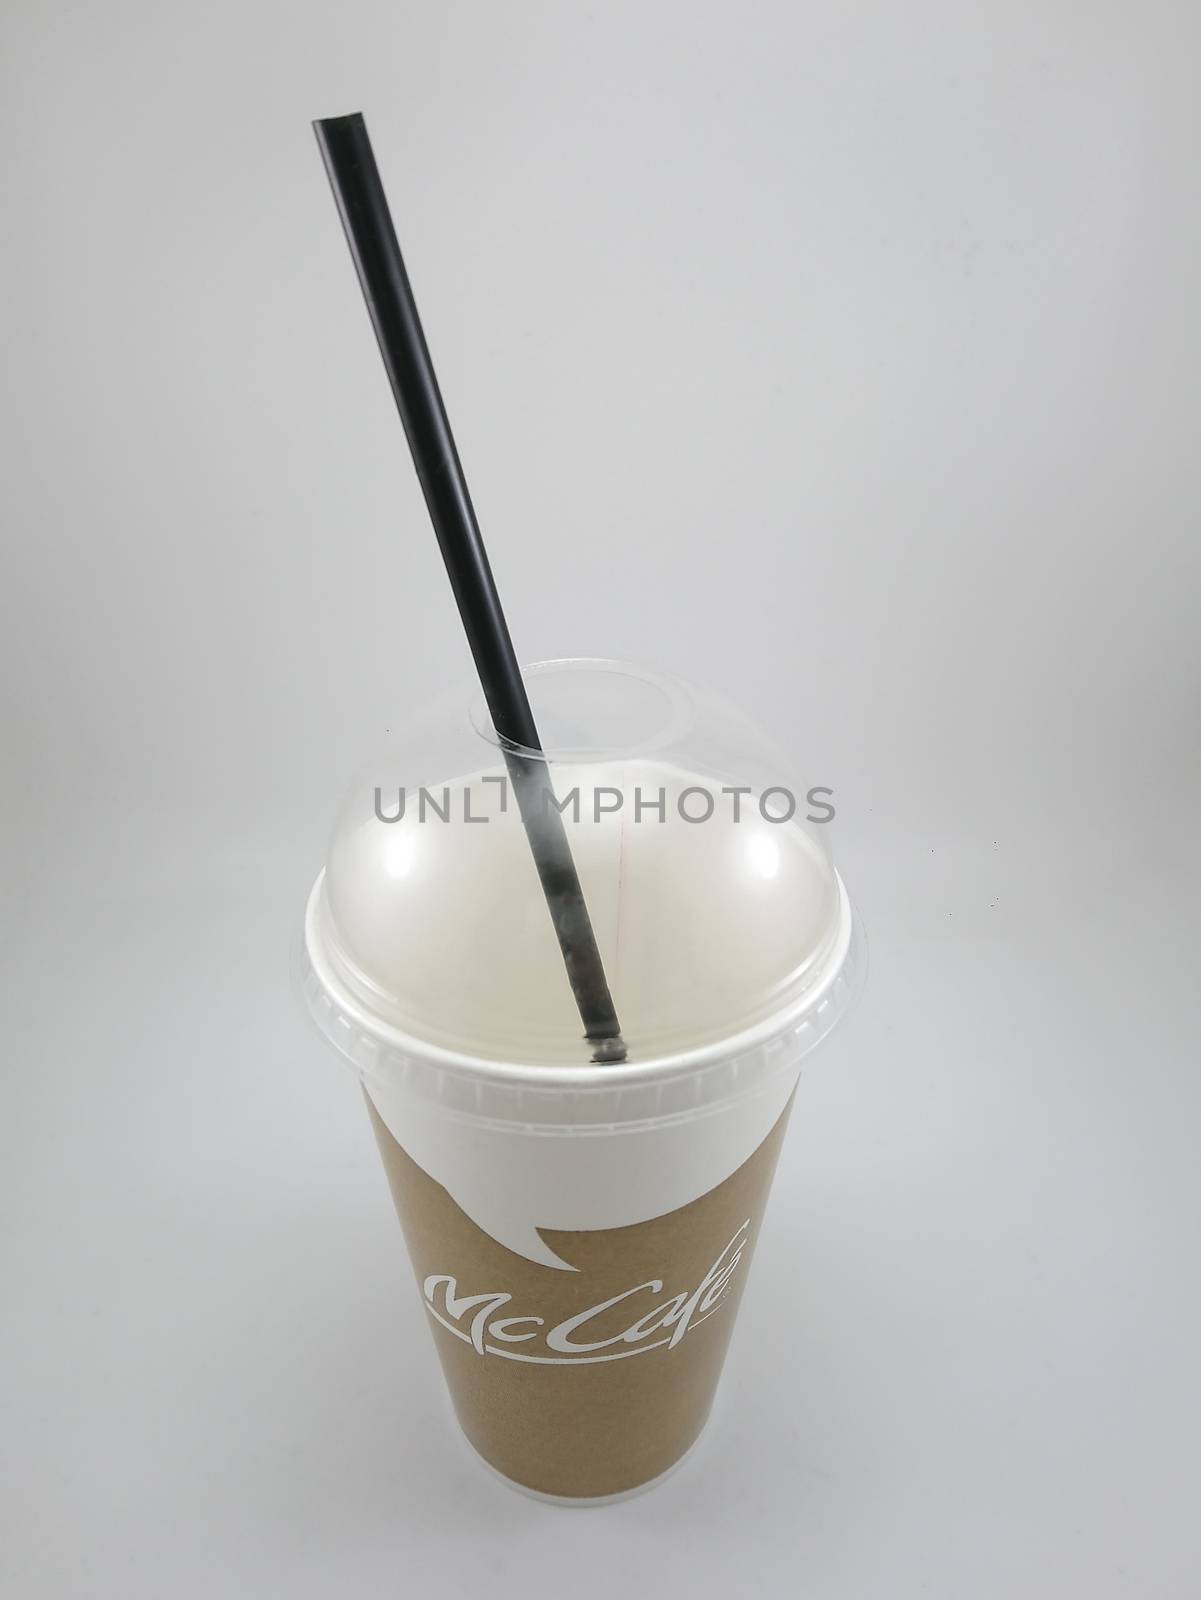 MANILA, PH - SEPT 24 - McCafe drinking cup with straw on September 24, 2020 in Manila, Philippines.